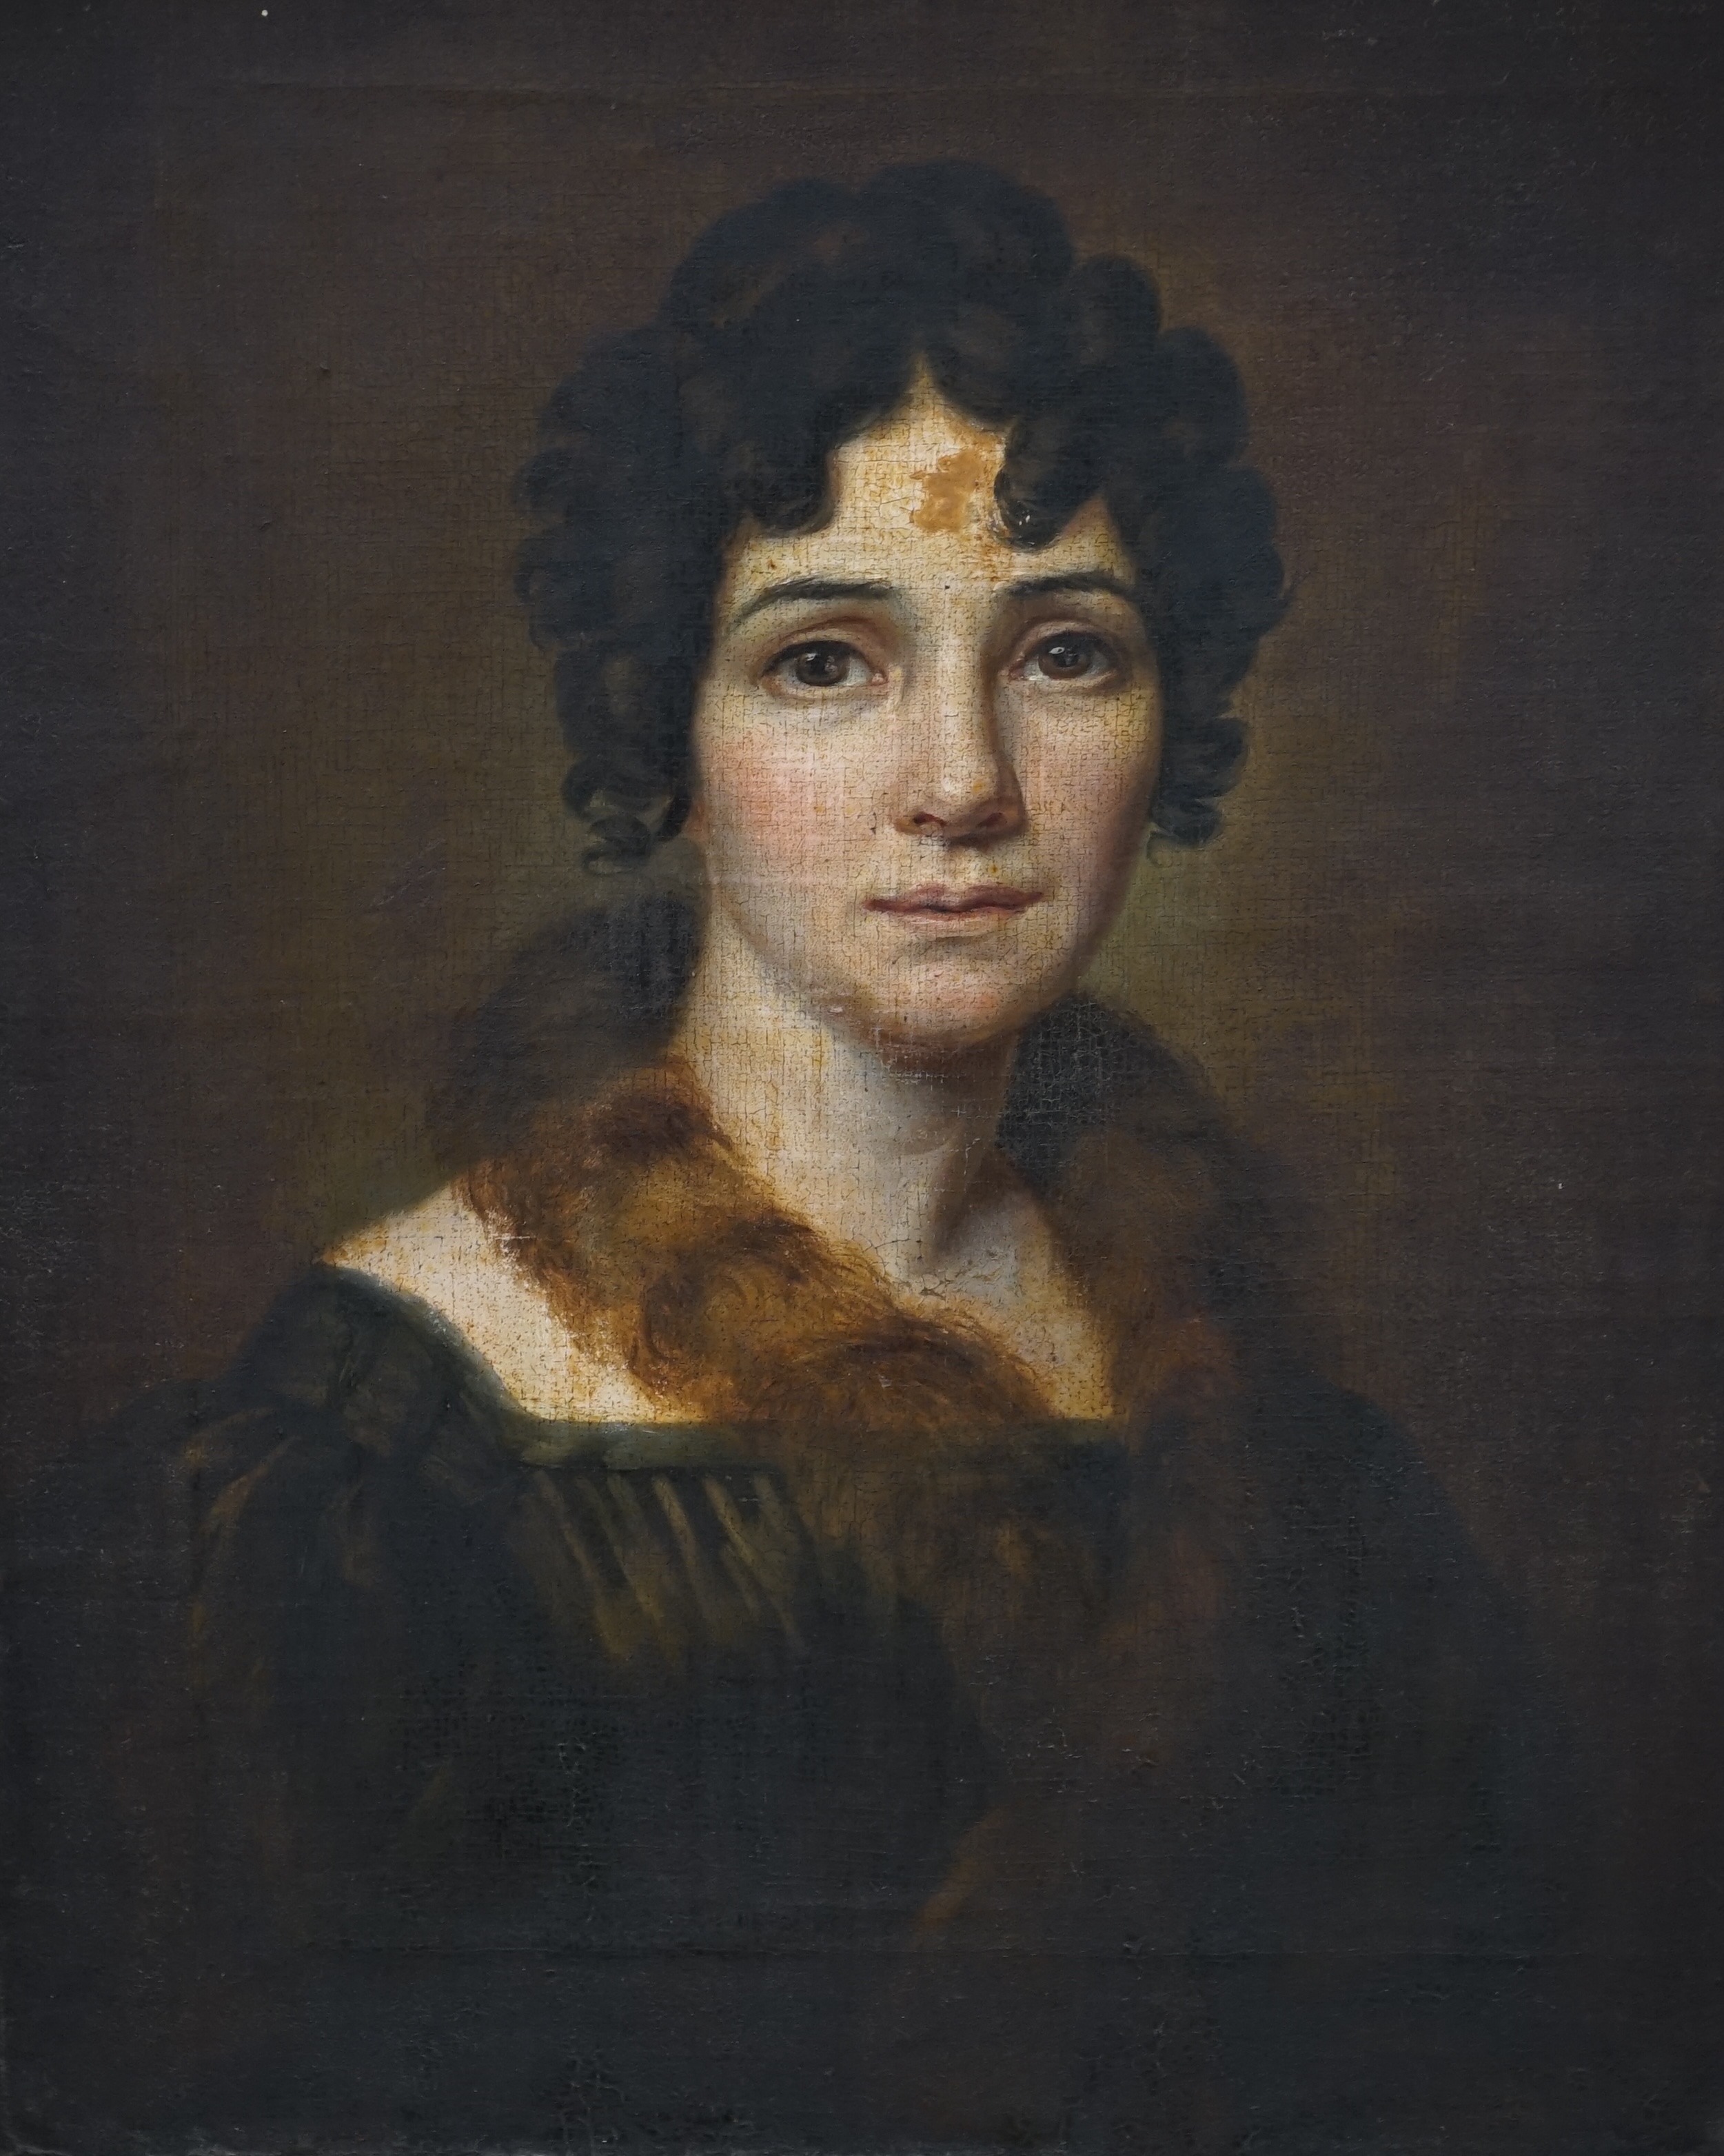 Oil on board, Portrait of a Regency lady, unsigned, 30 x 25cm, gilt framed. Condition - fair, some losses to the frame